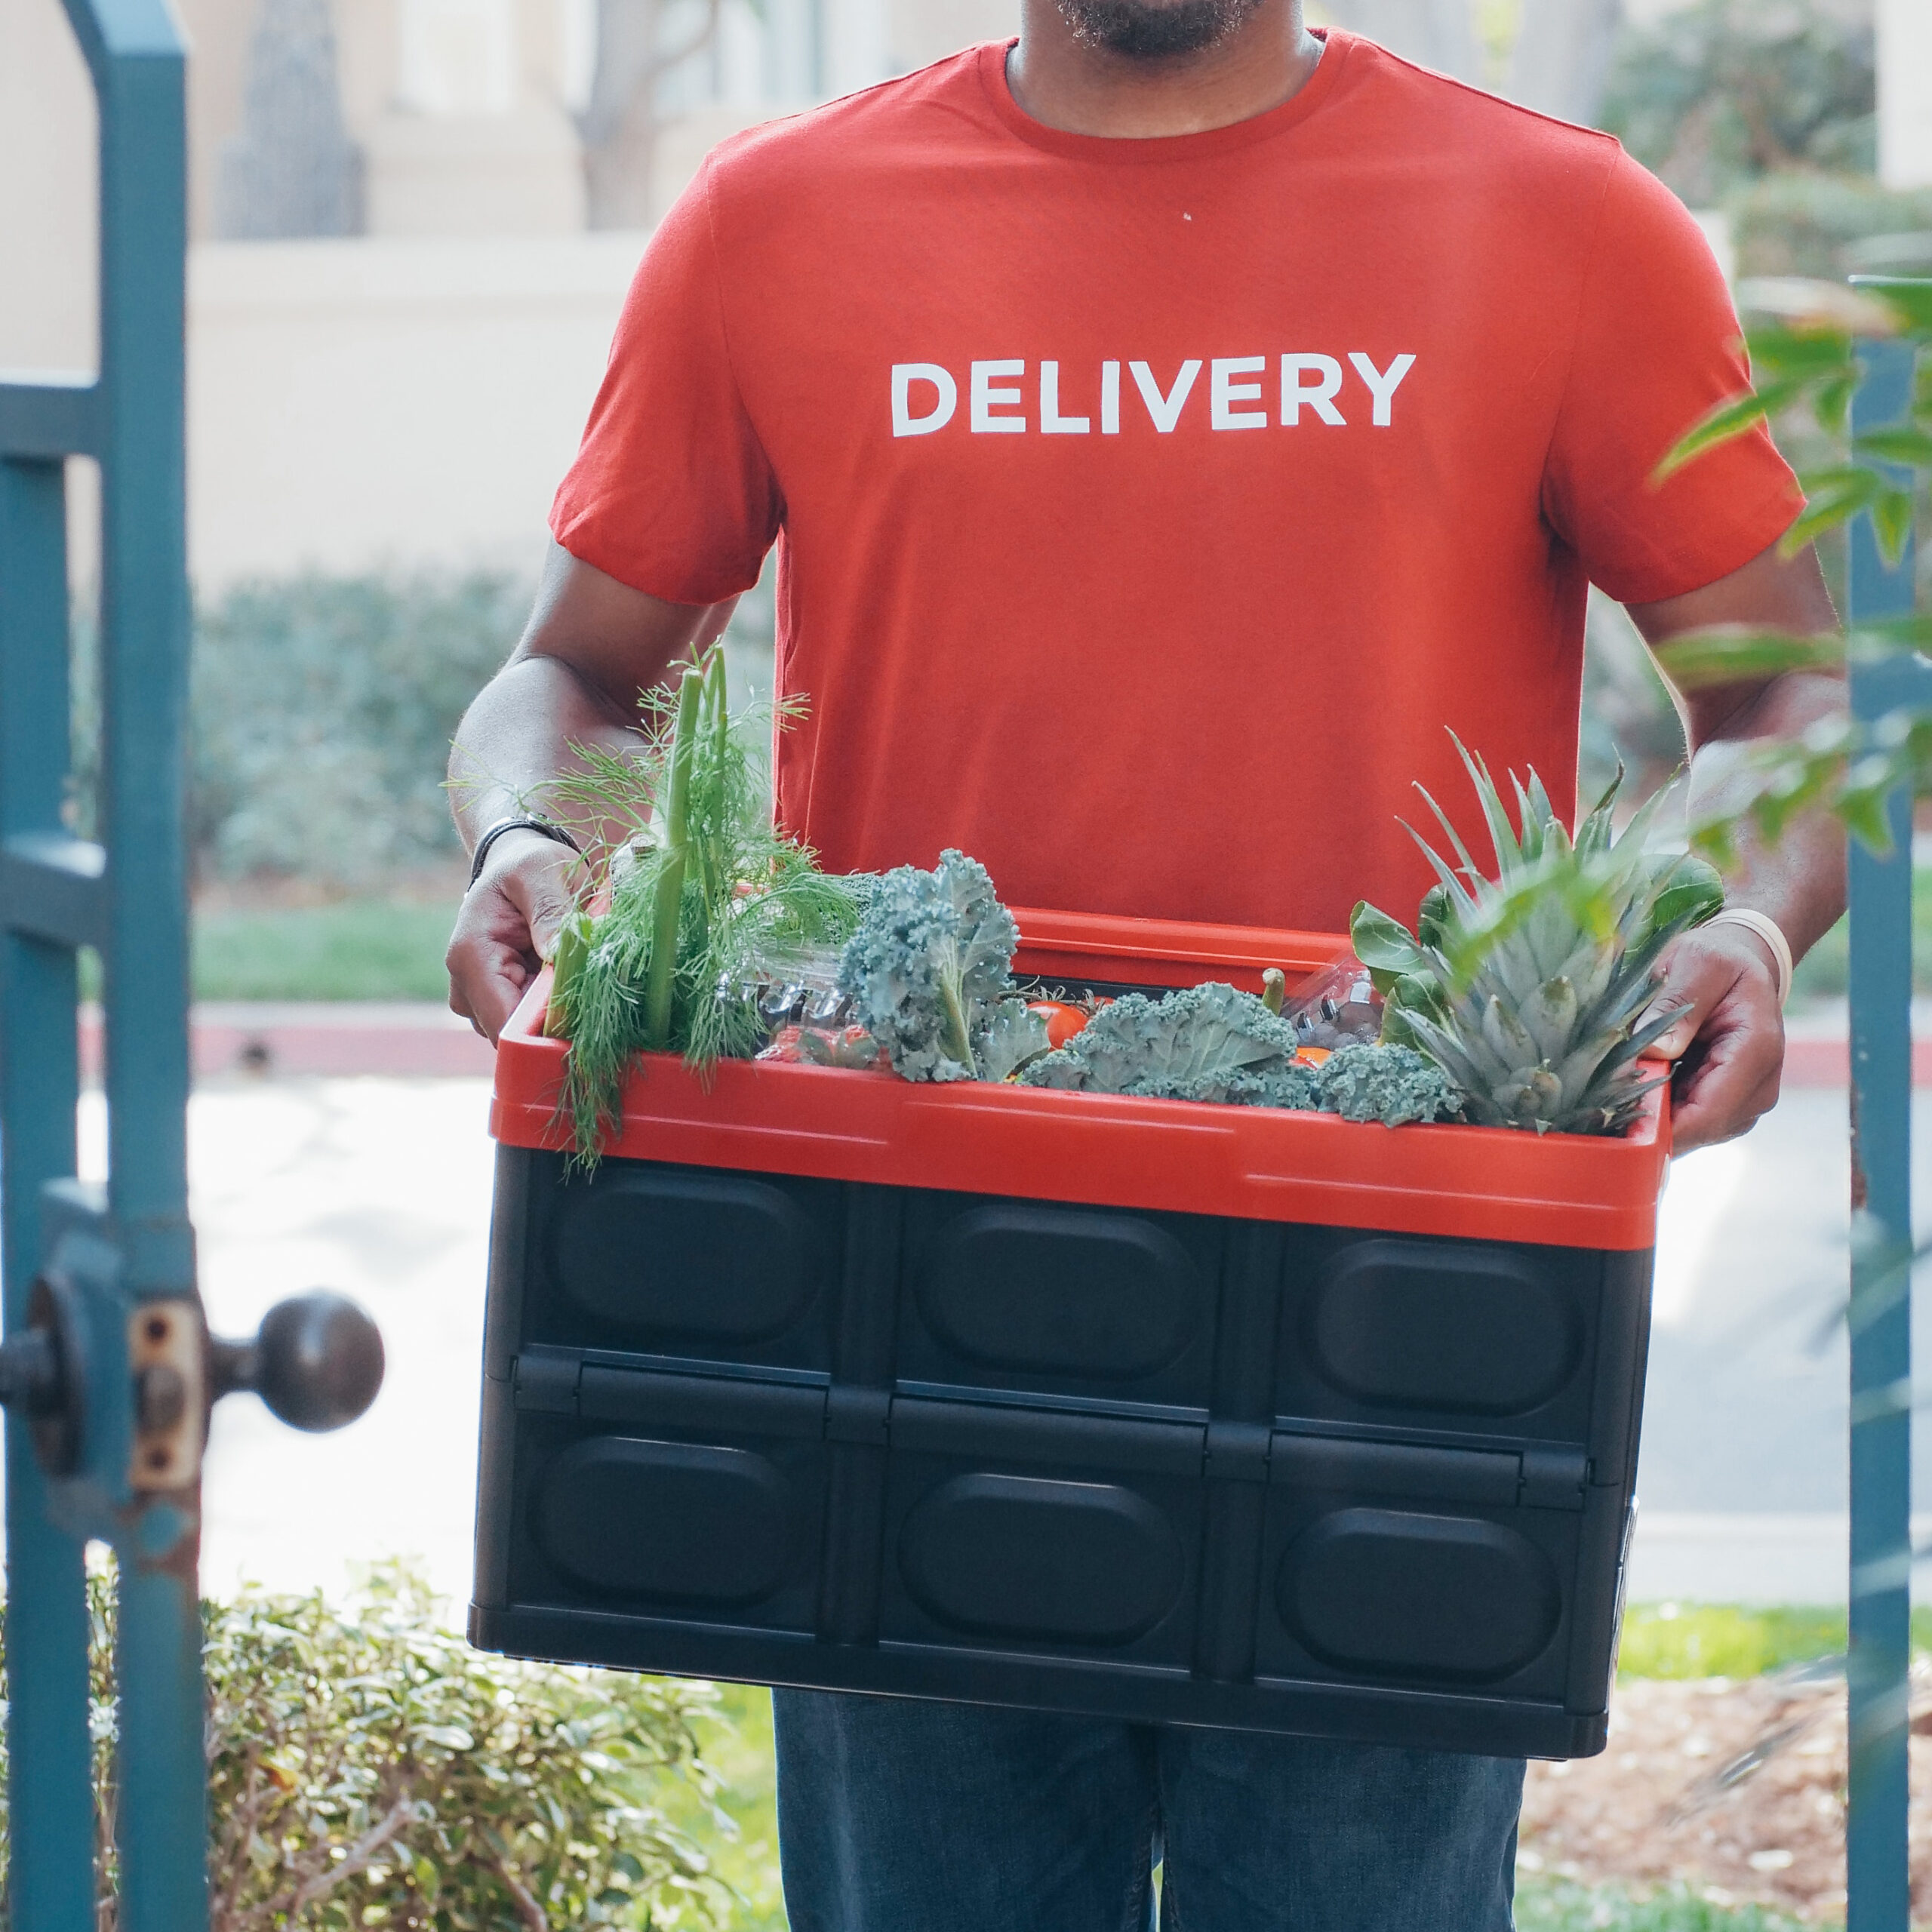 Grocery Delivery Service